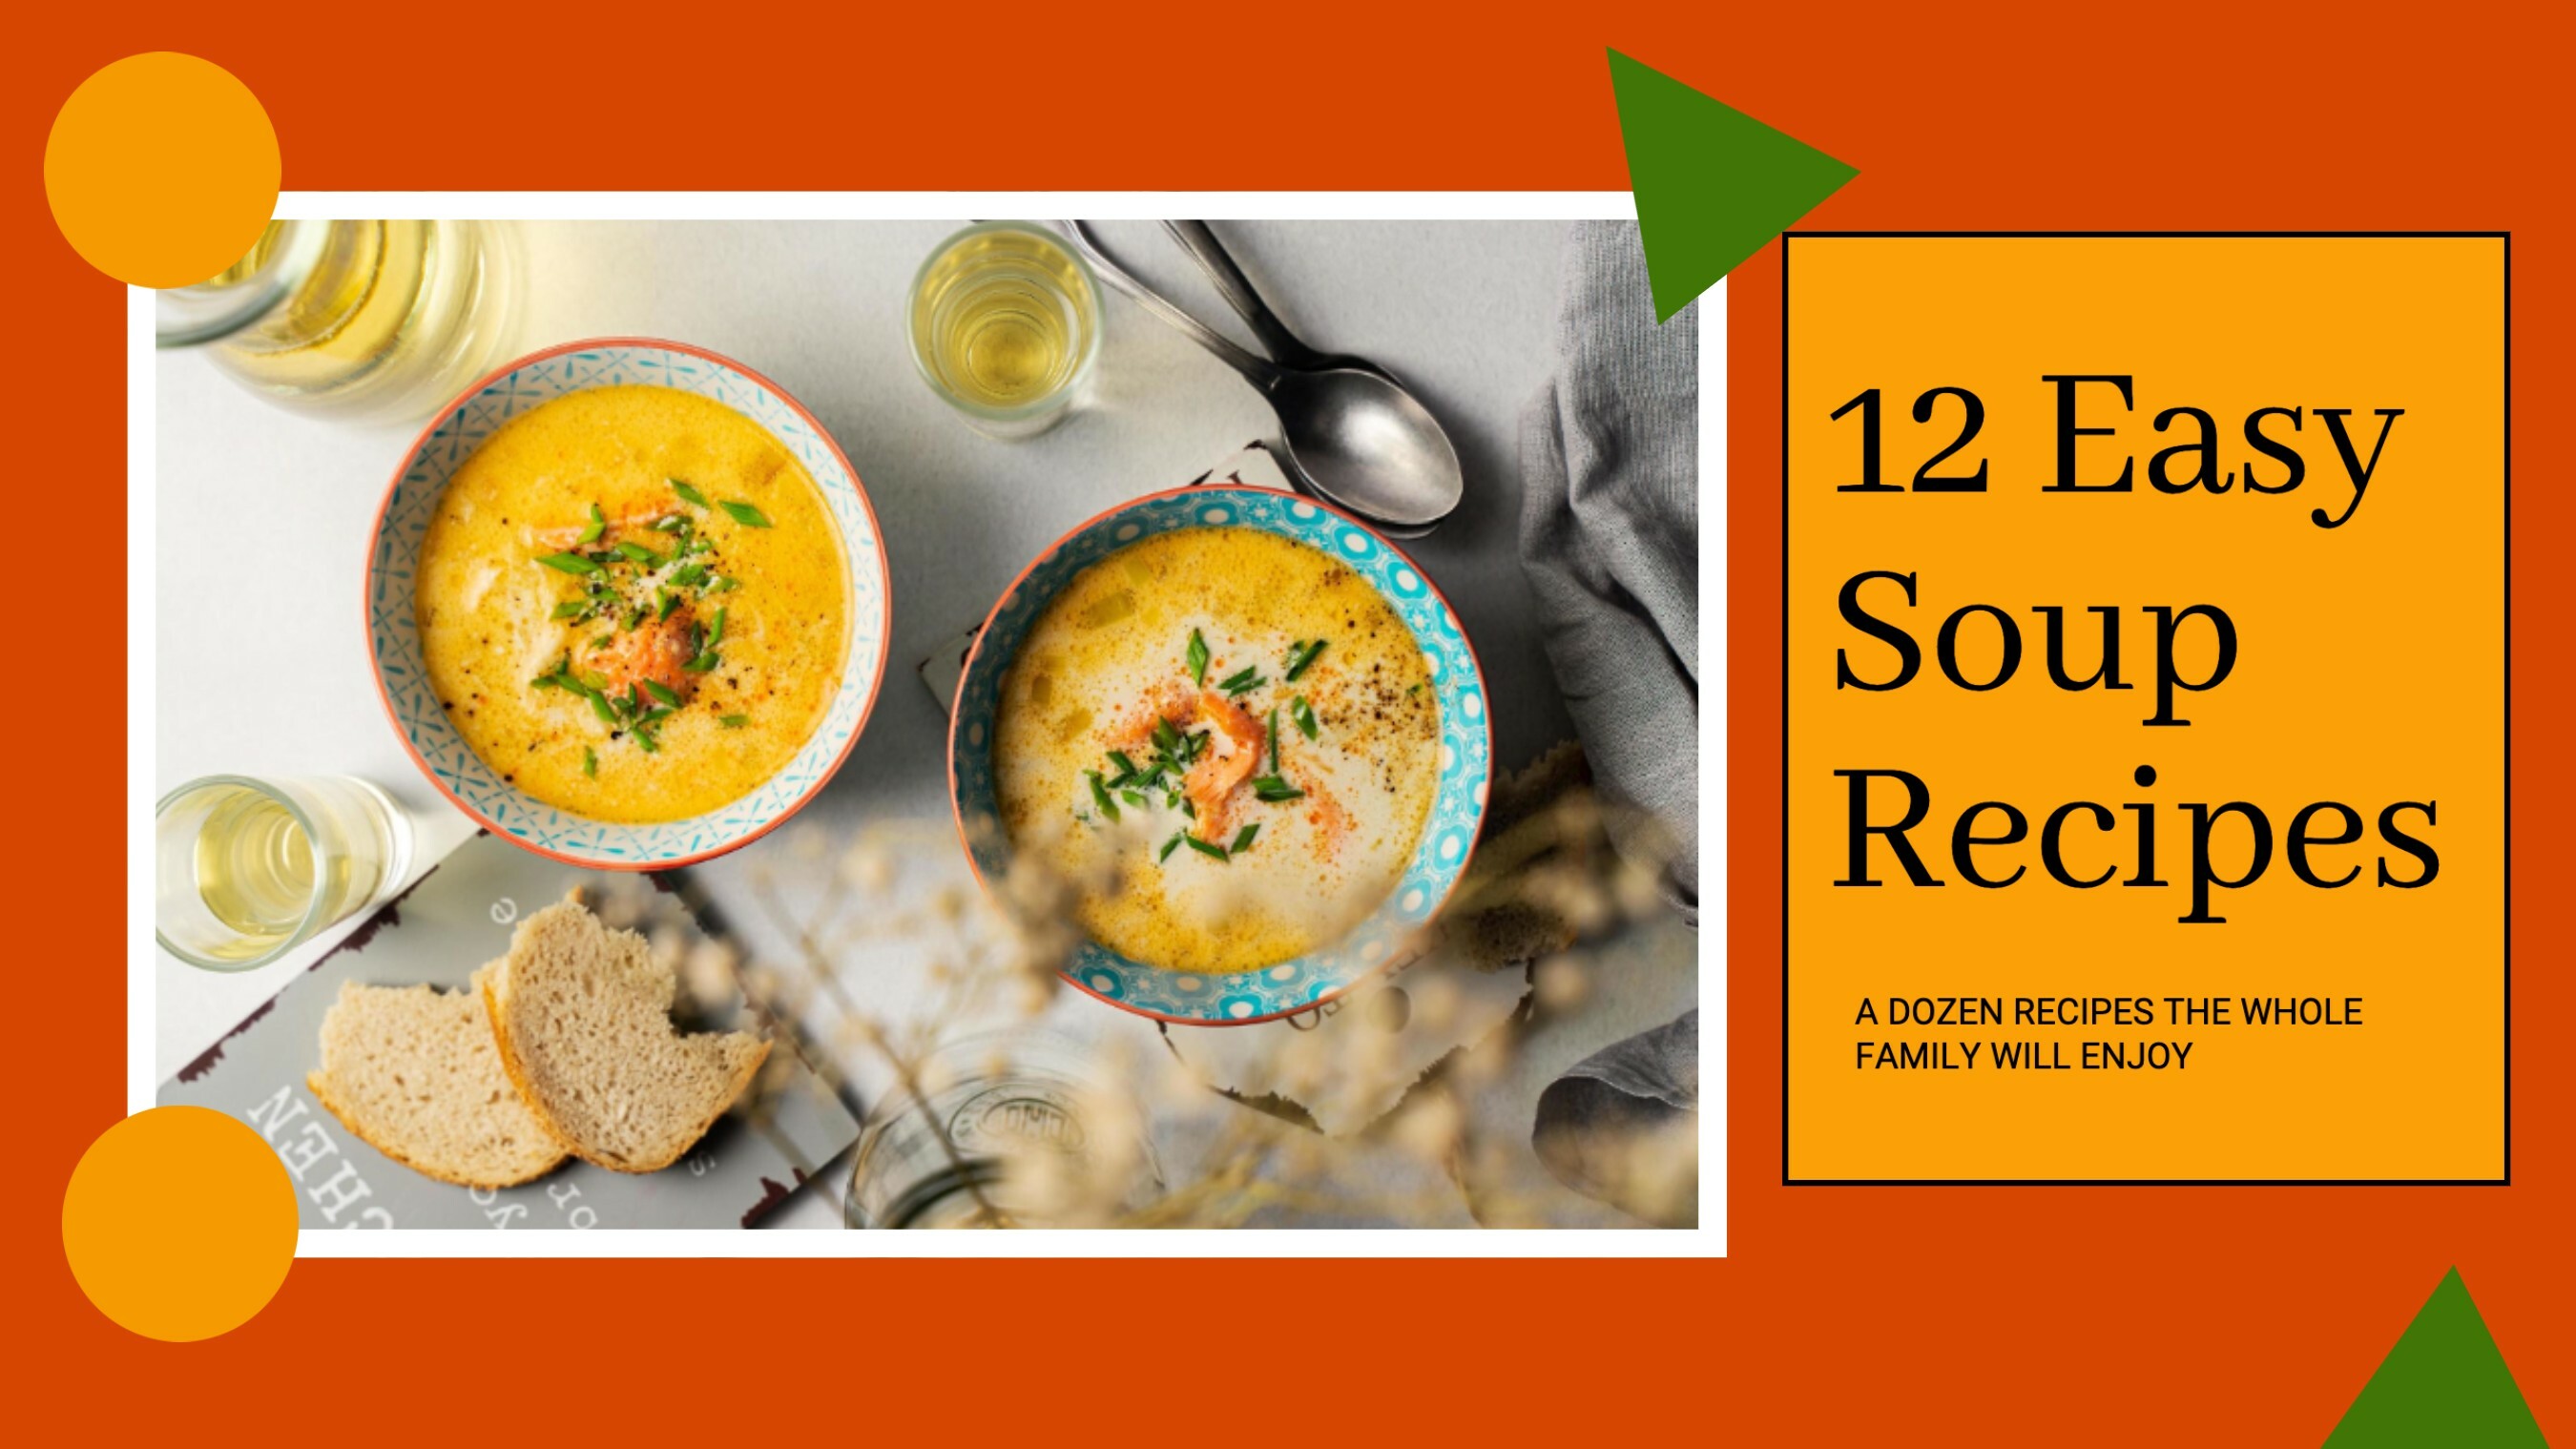 Easy soup recipes template